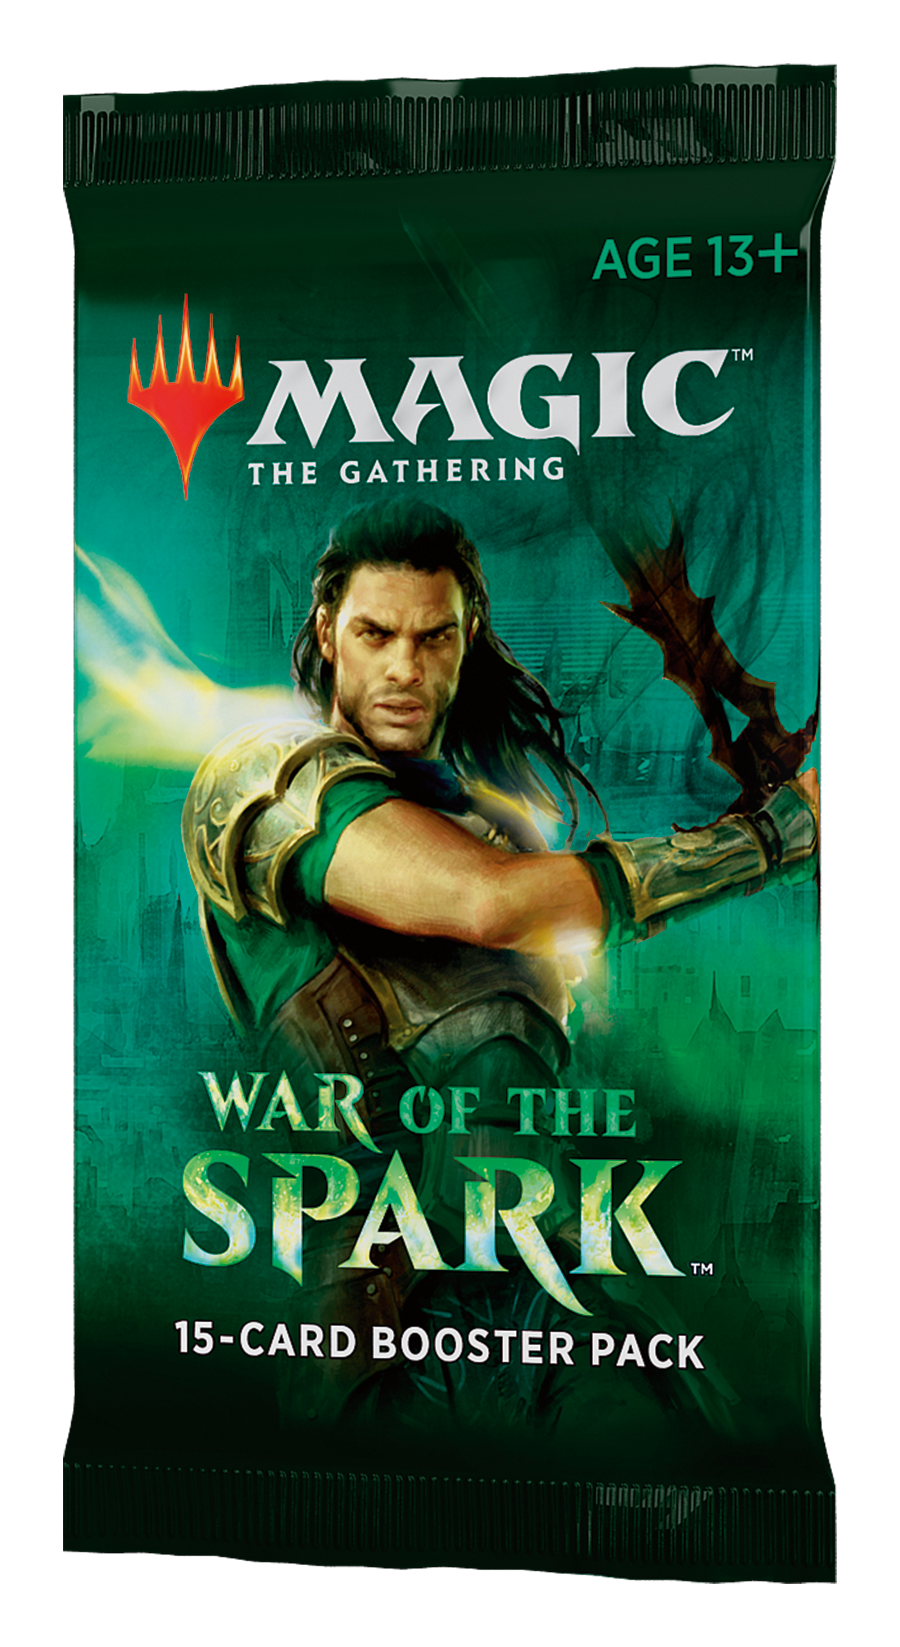 magic the gathering war of the sparkbox